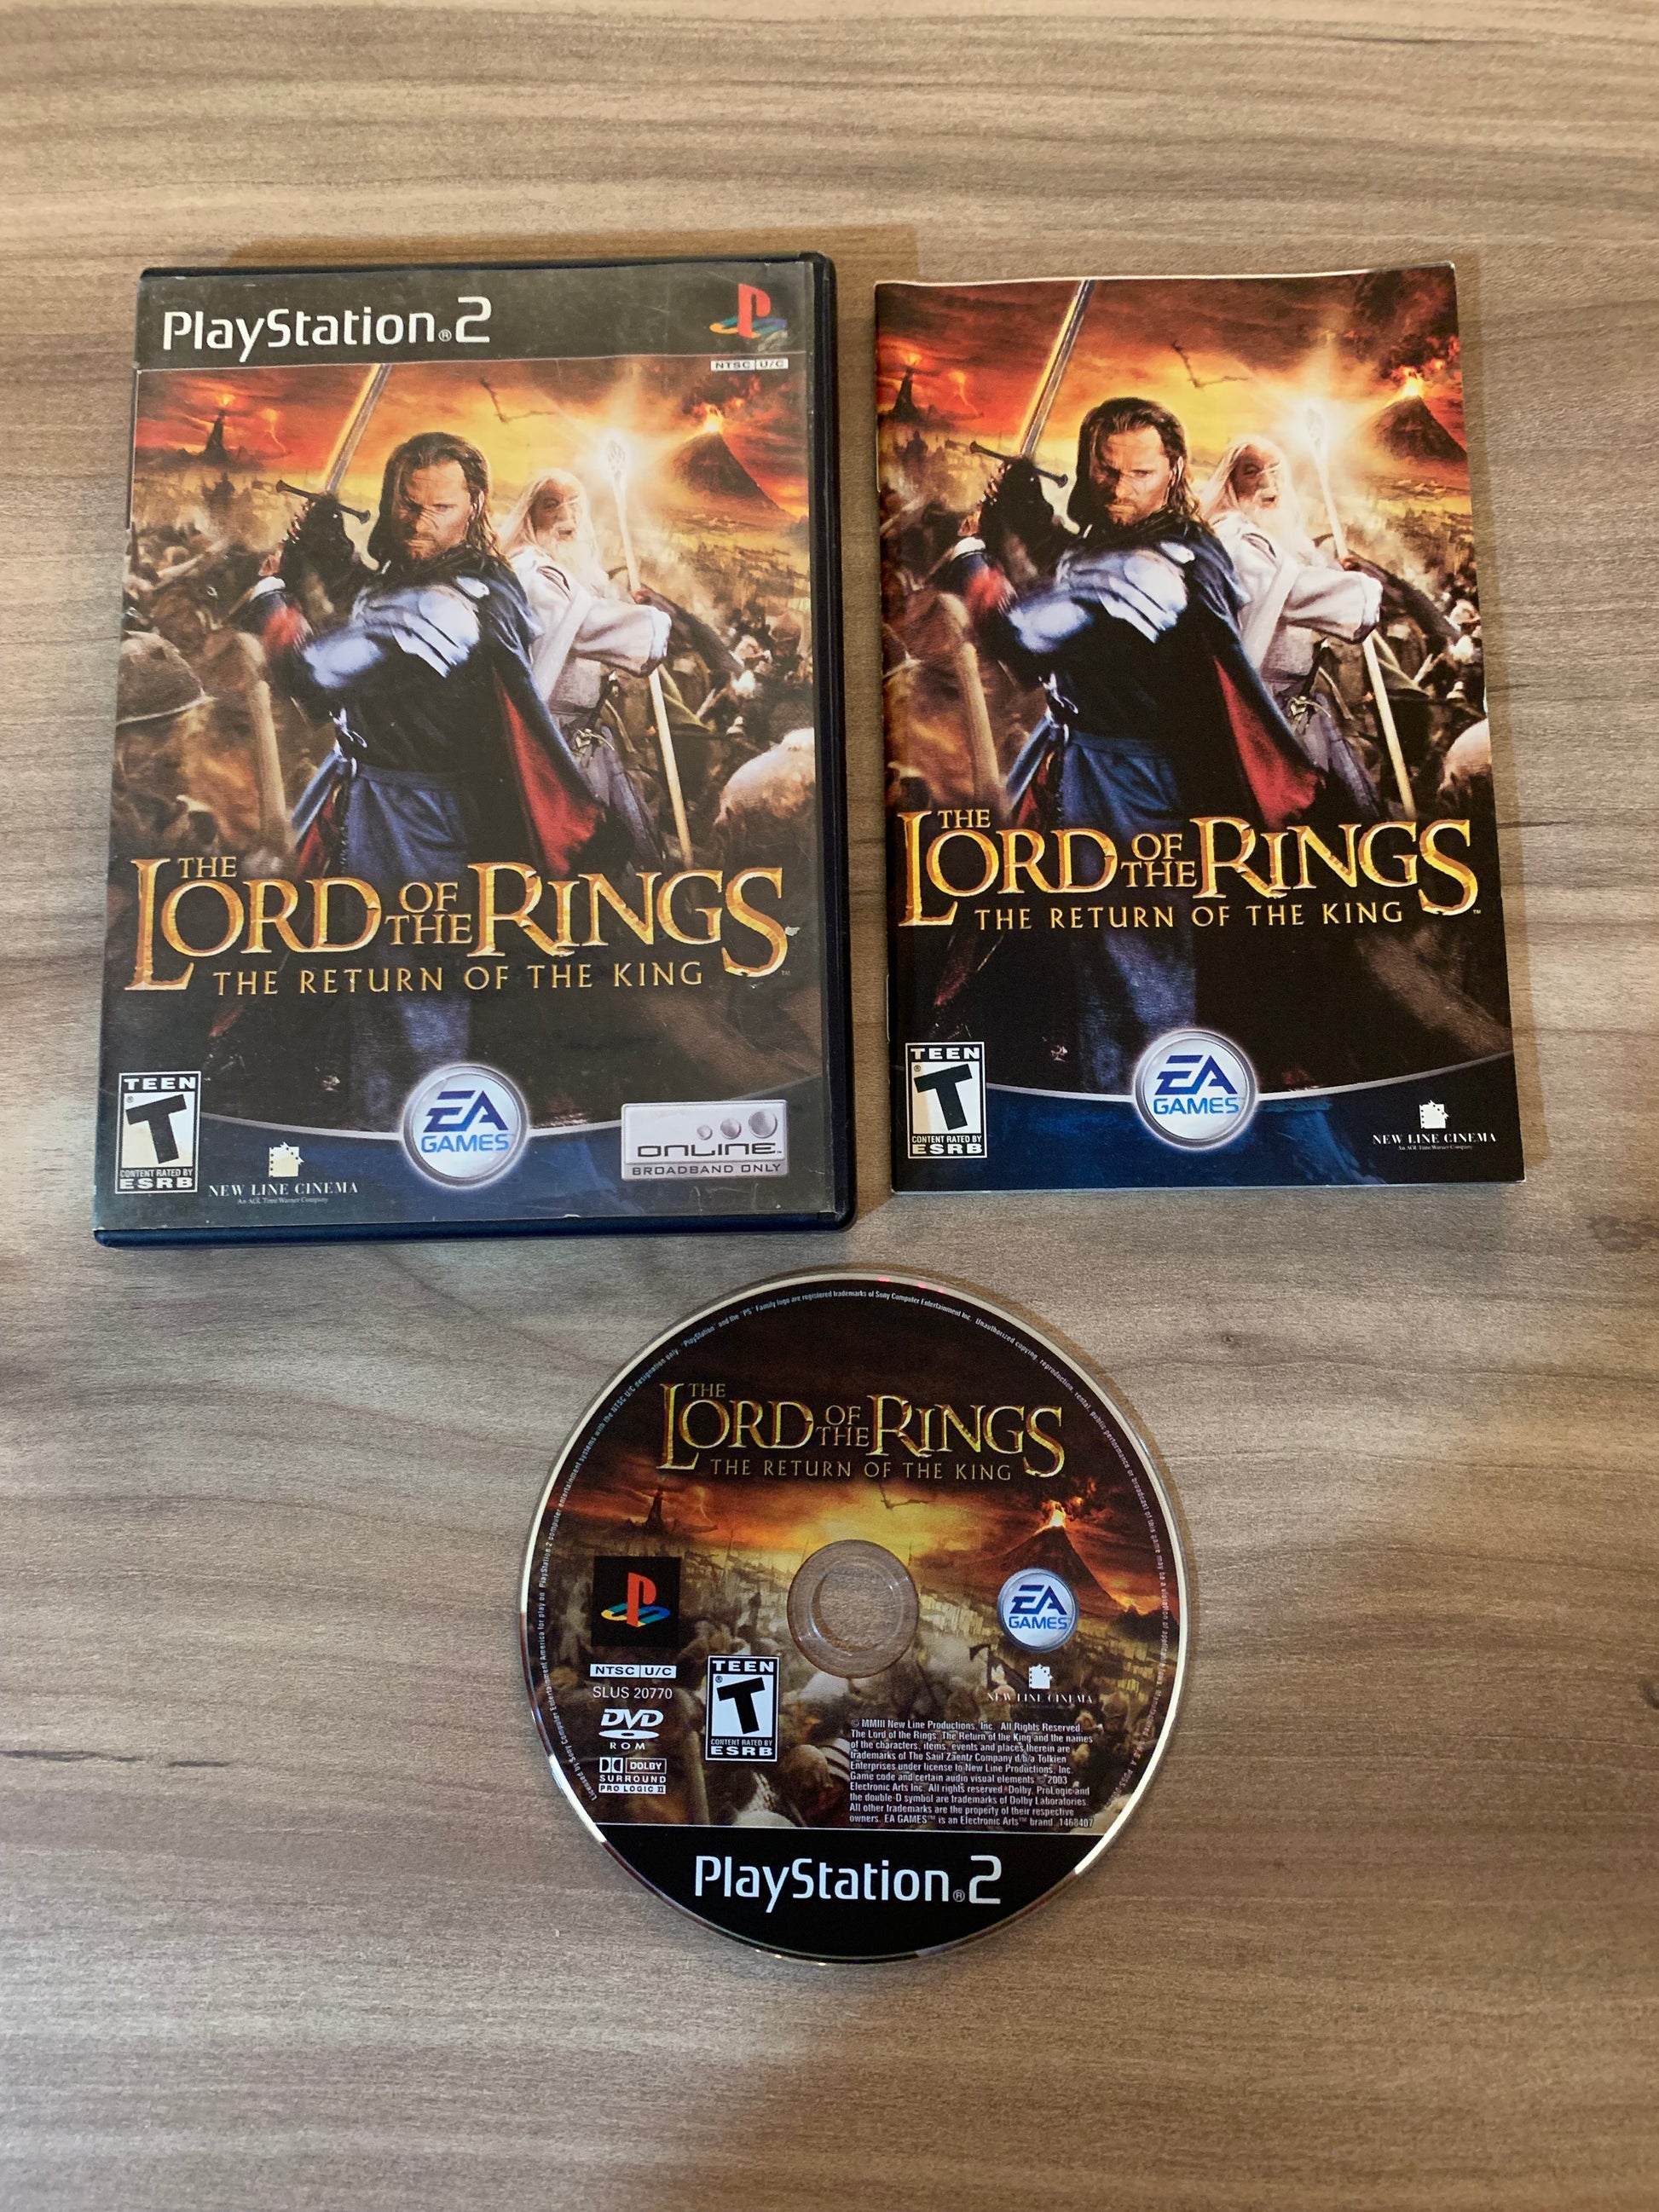 PiXEL-RETRO.COM : SONY PLAYSTATION 2 (PS2) COMPLET CIB BOX MANUAL GAME NTSC THE LORD OF THE RINGS THE RETURN OF THE KING